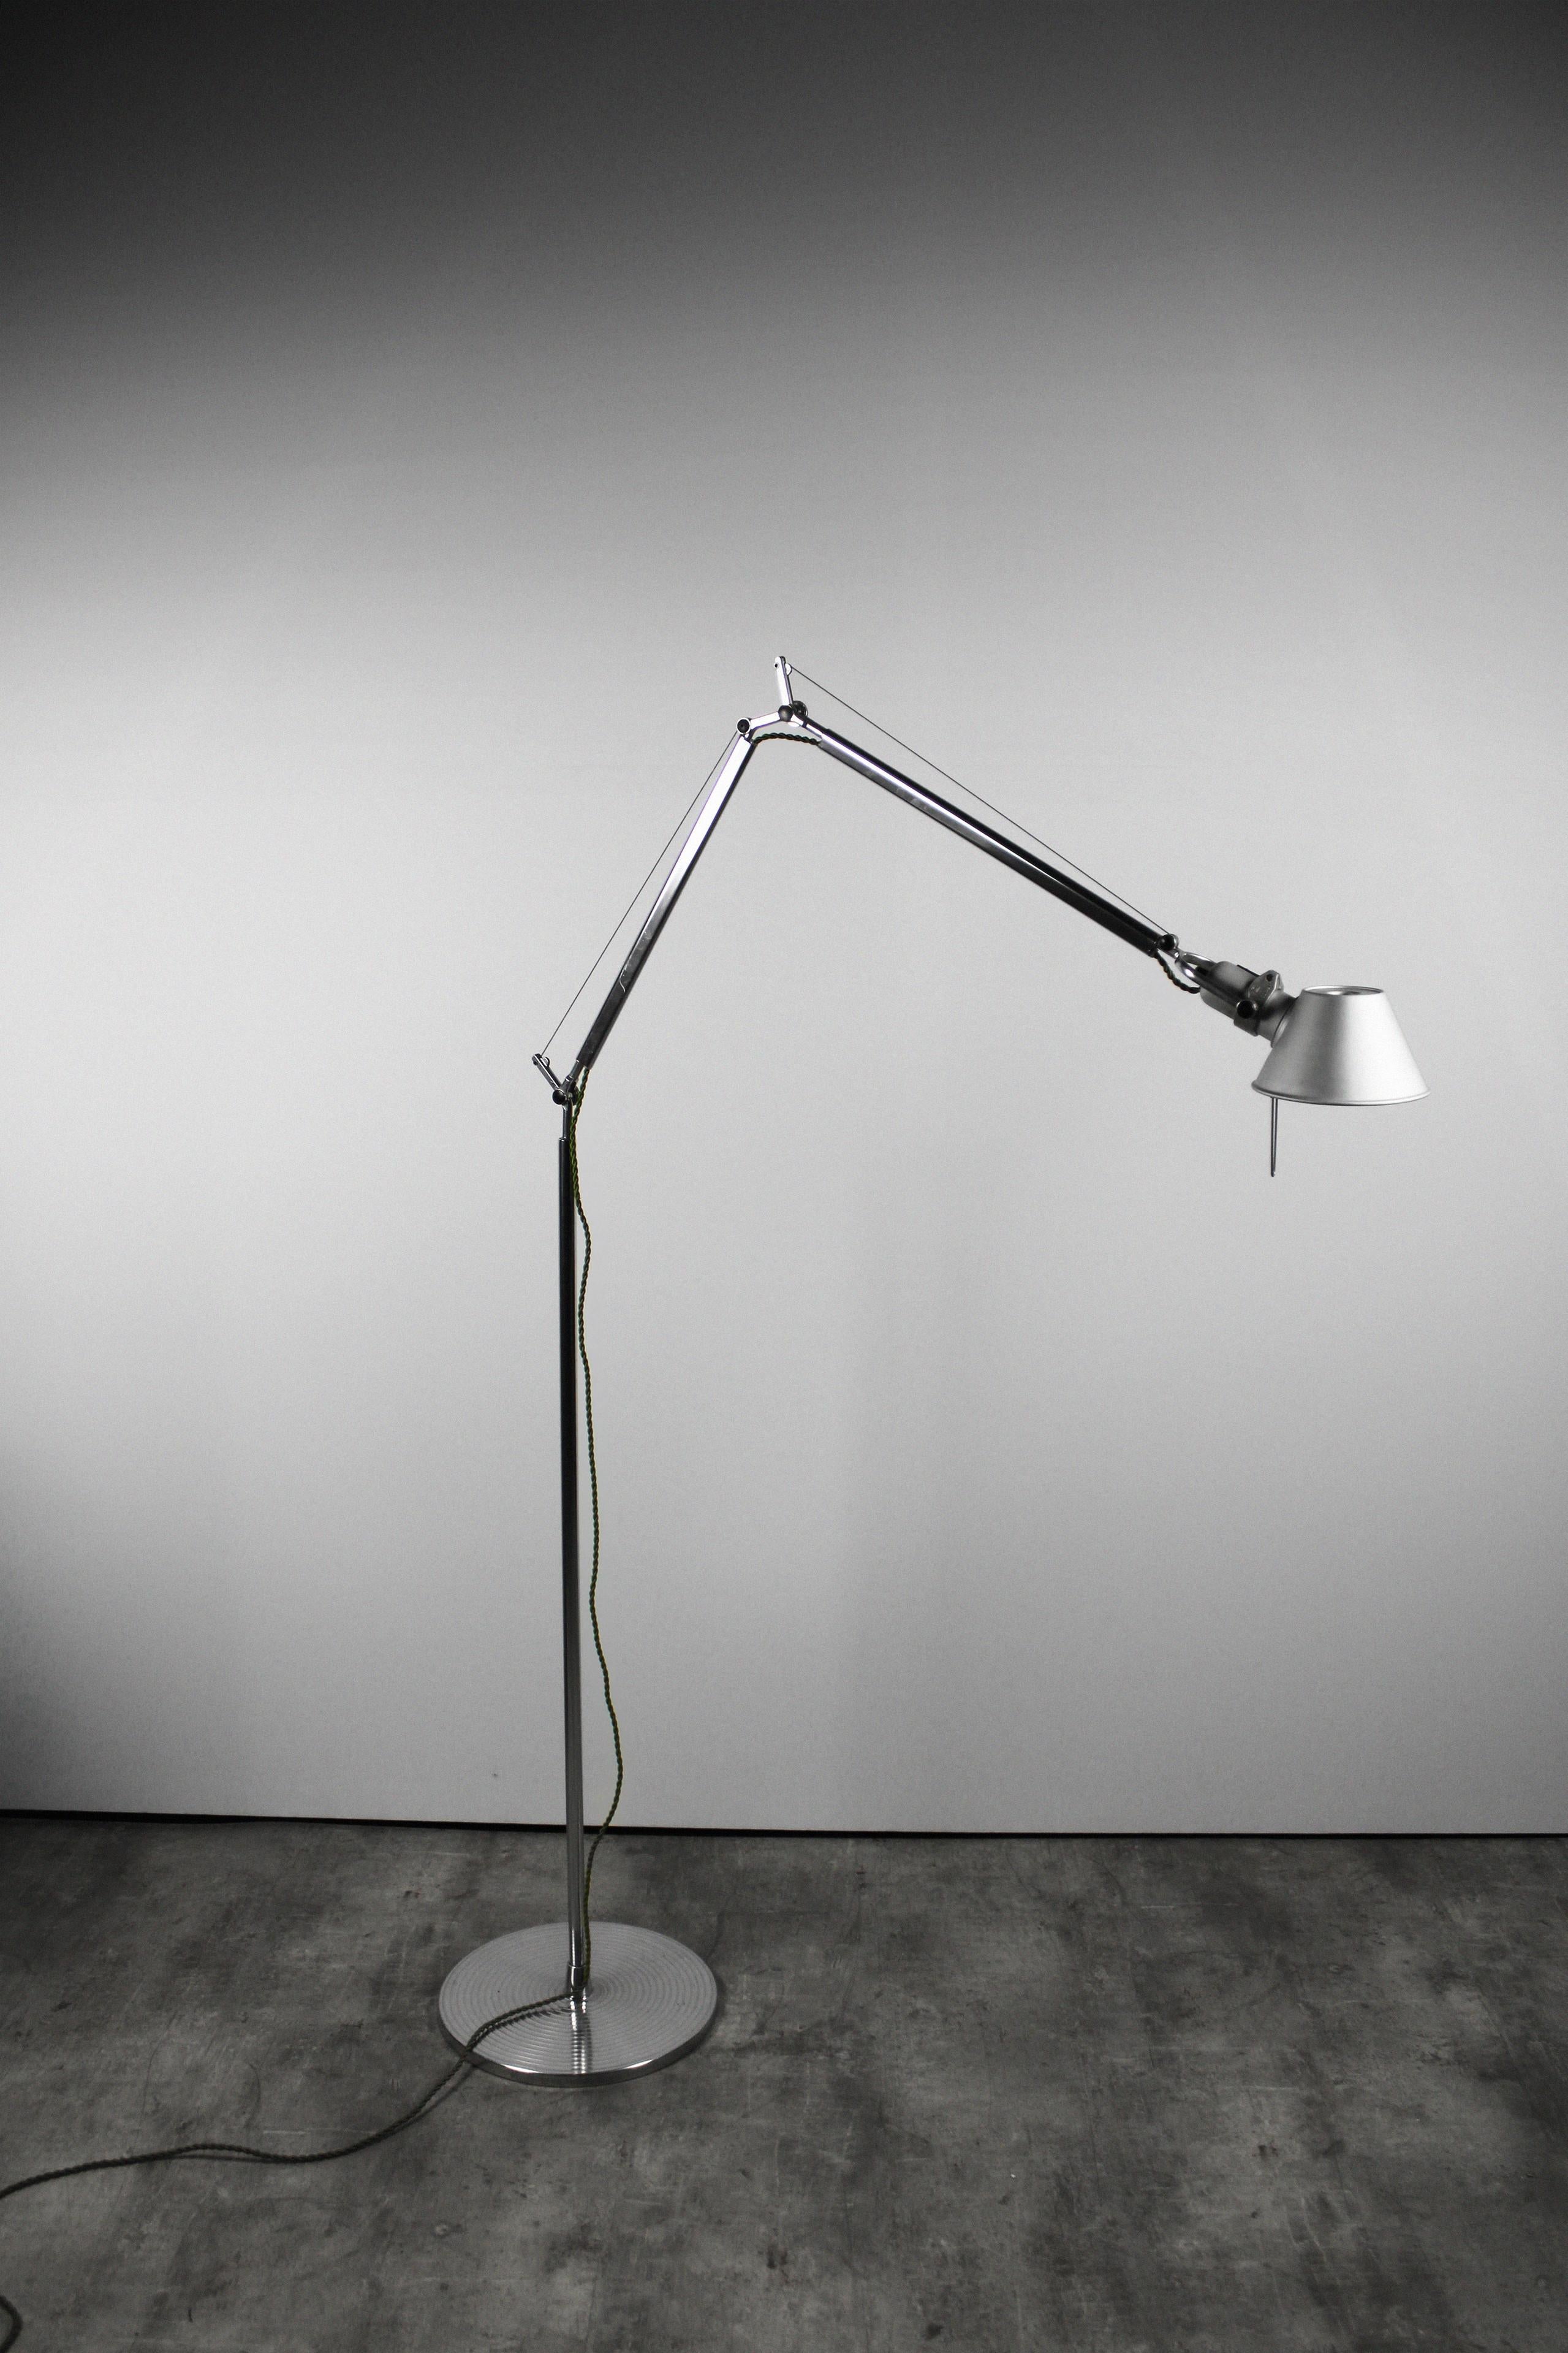 The design of this vintage floor lamp called Tolomeo terra floor lamp comes from Michel de Lucchi & Giancarlo Fassina from the series of the late 1980s, and is manufactured in Italy by Artemide. This model also differs from others because of the